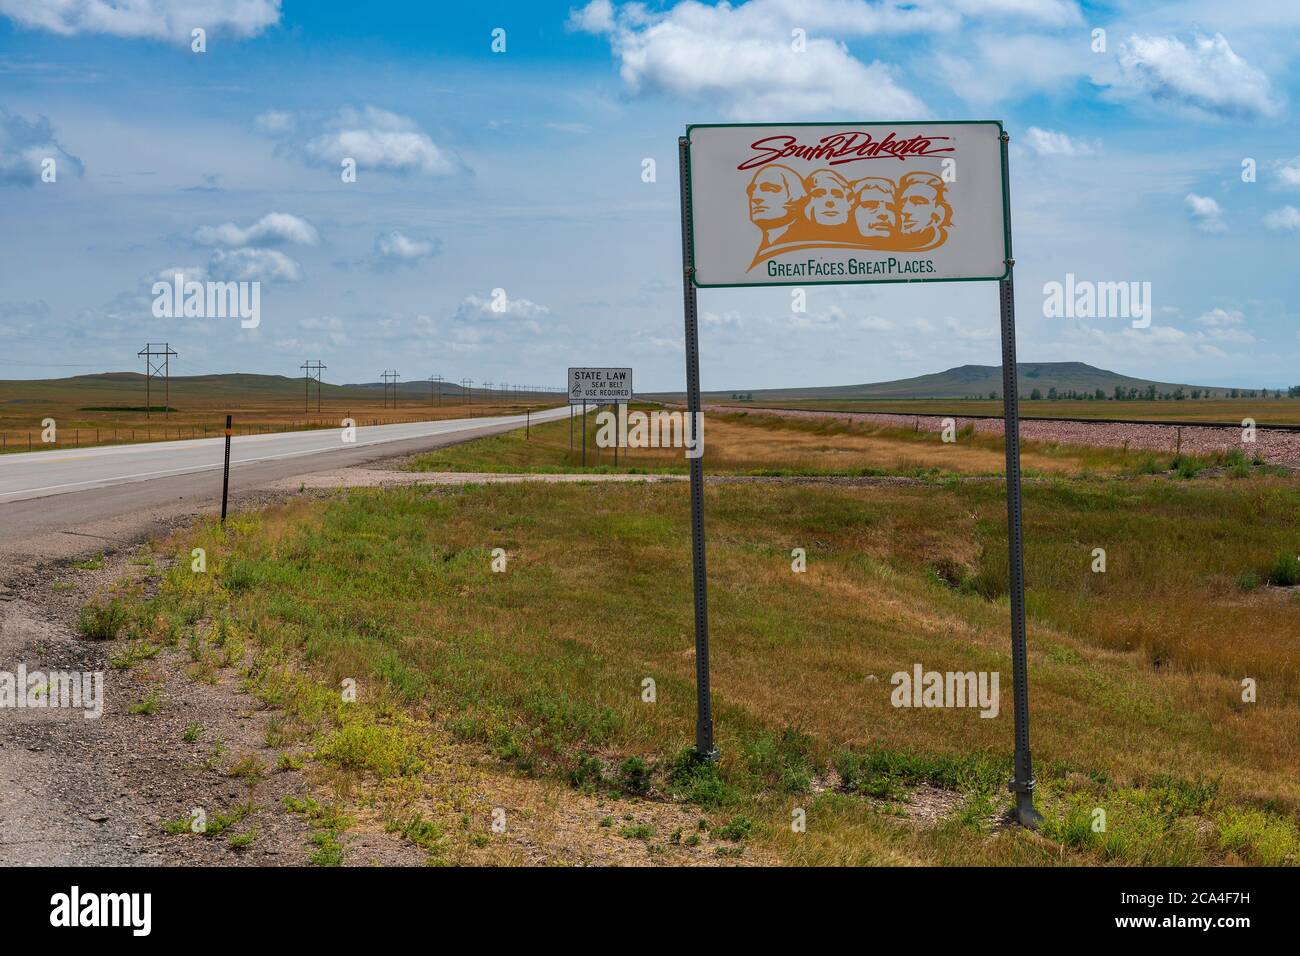 South Dakota, USA - July 28, 2020: A South Dakota State welcome sign along the US Highway 212 in the USA. Stock Photo